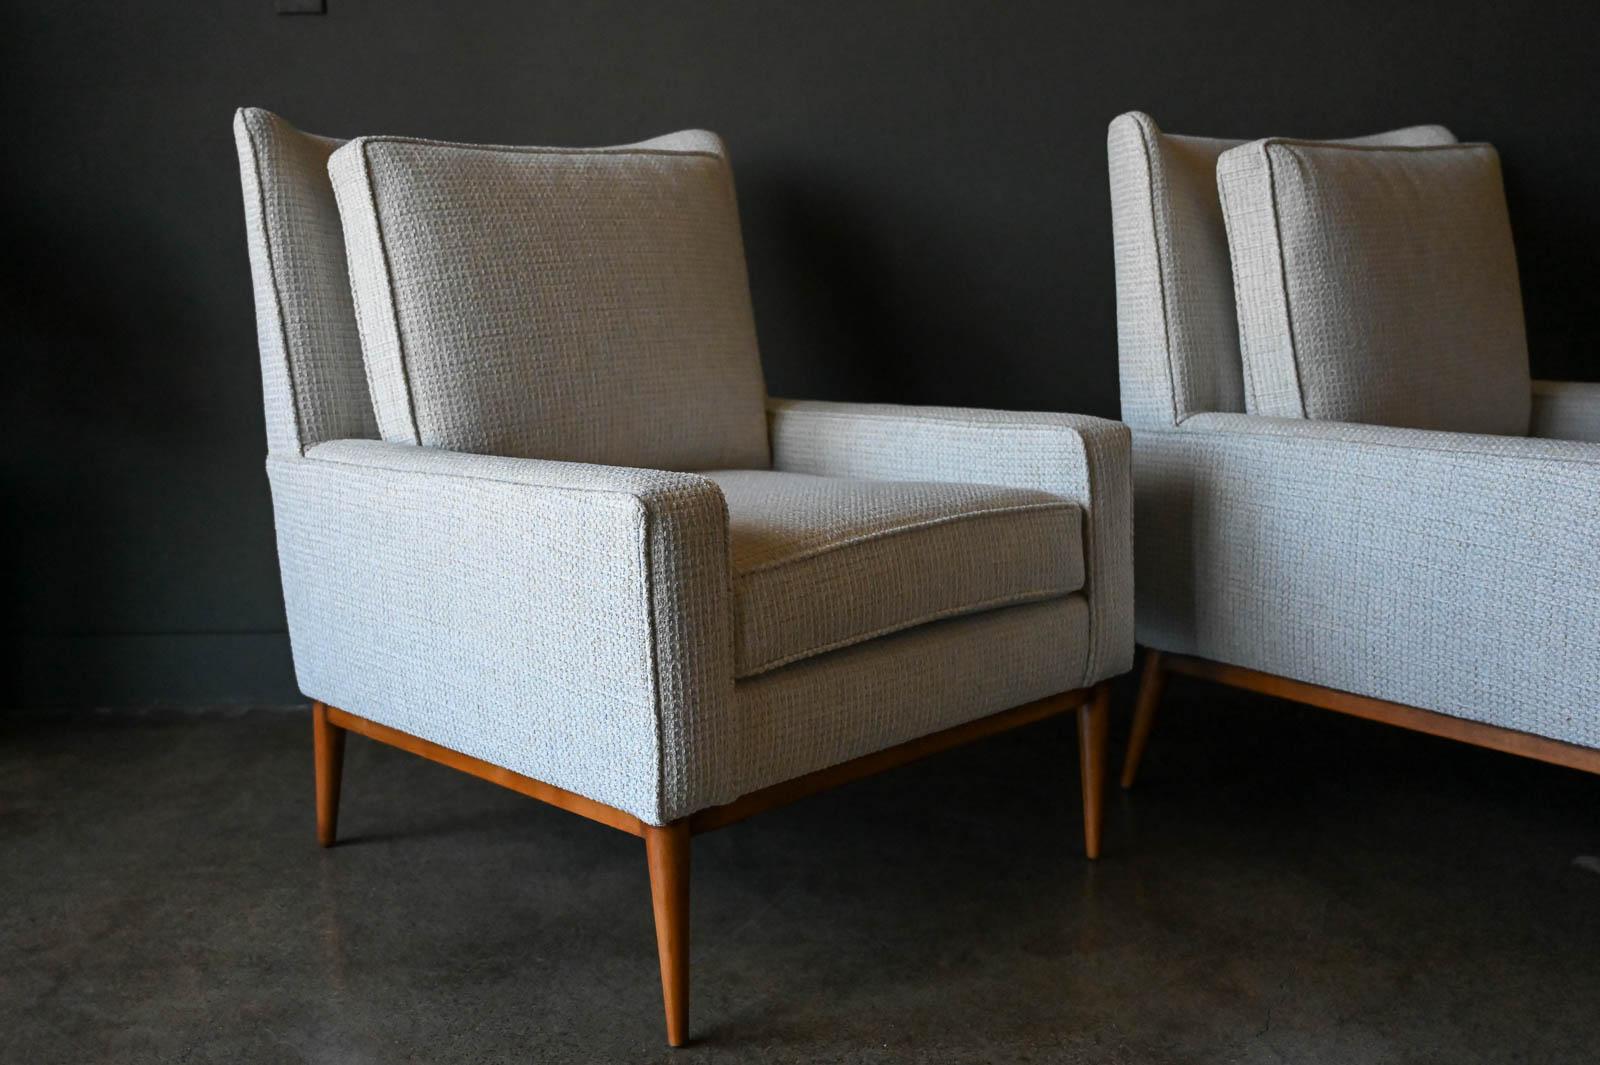 Mid-20th Century Pair of Paul McCobb Model 302 Lounge Chairs with Ottoman, circa 1955